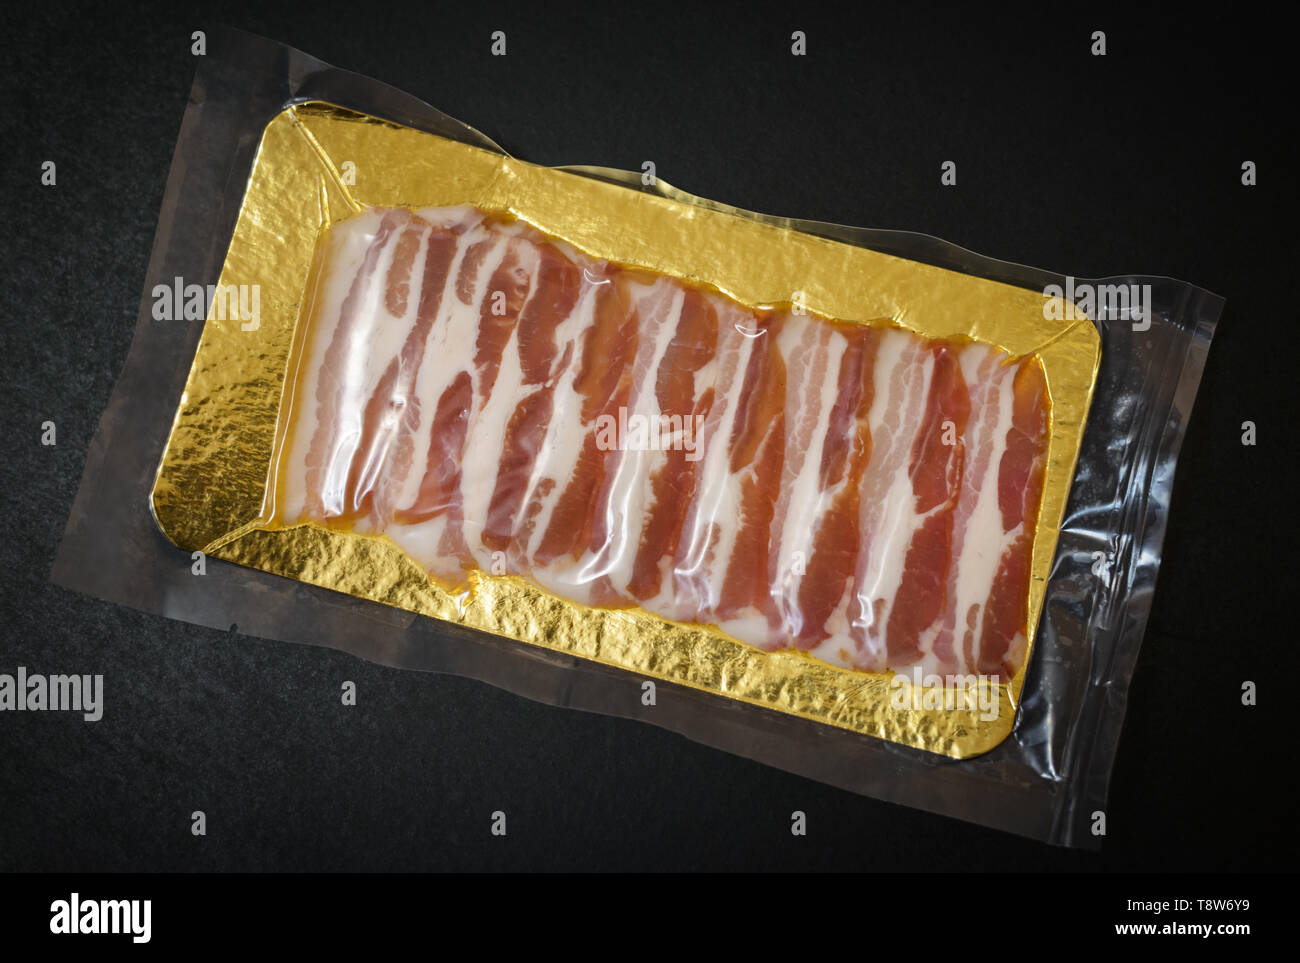 Bacon in the package on dark background. Stock Photo